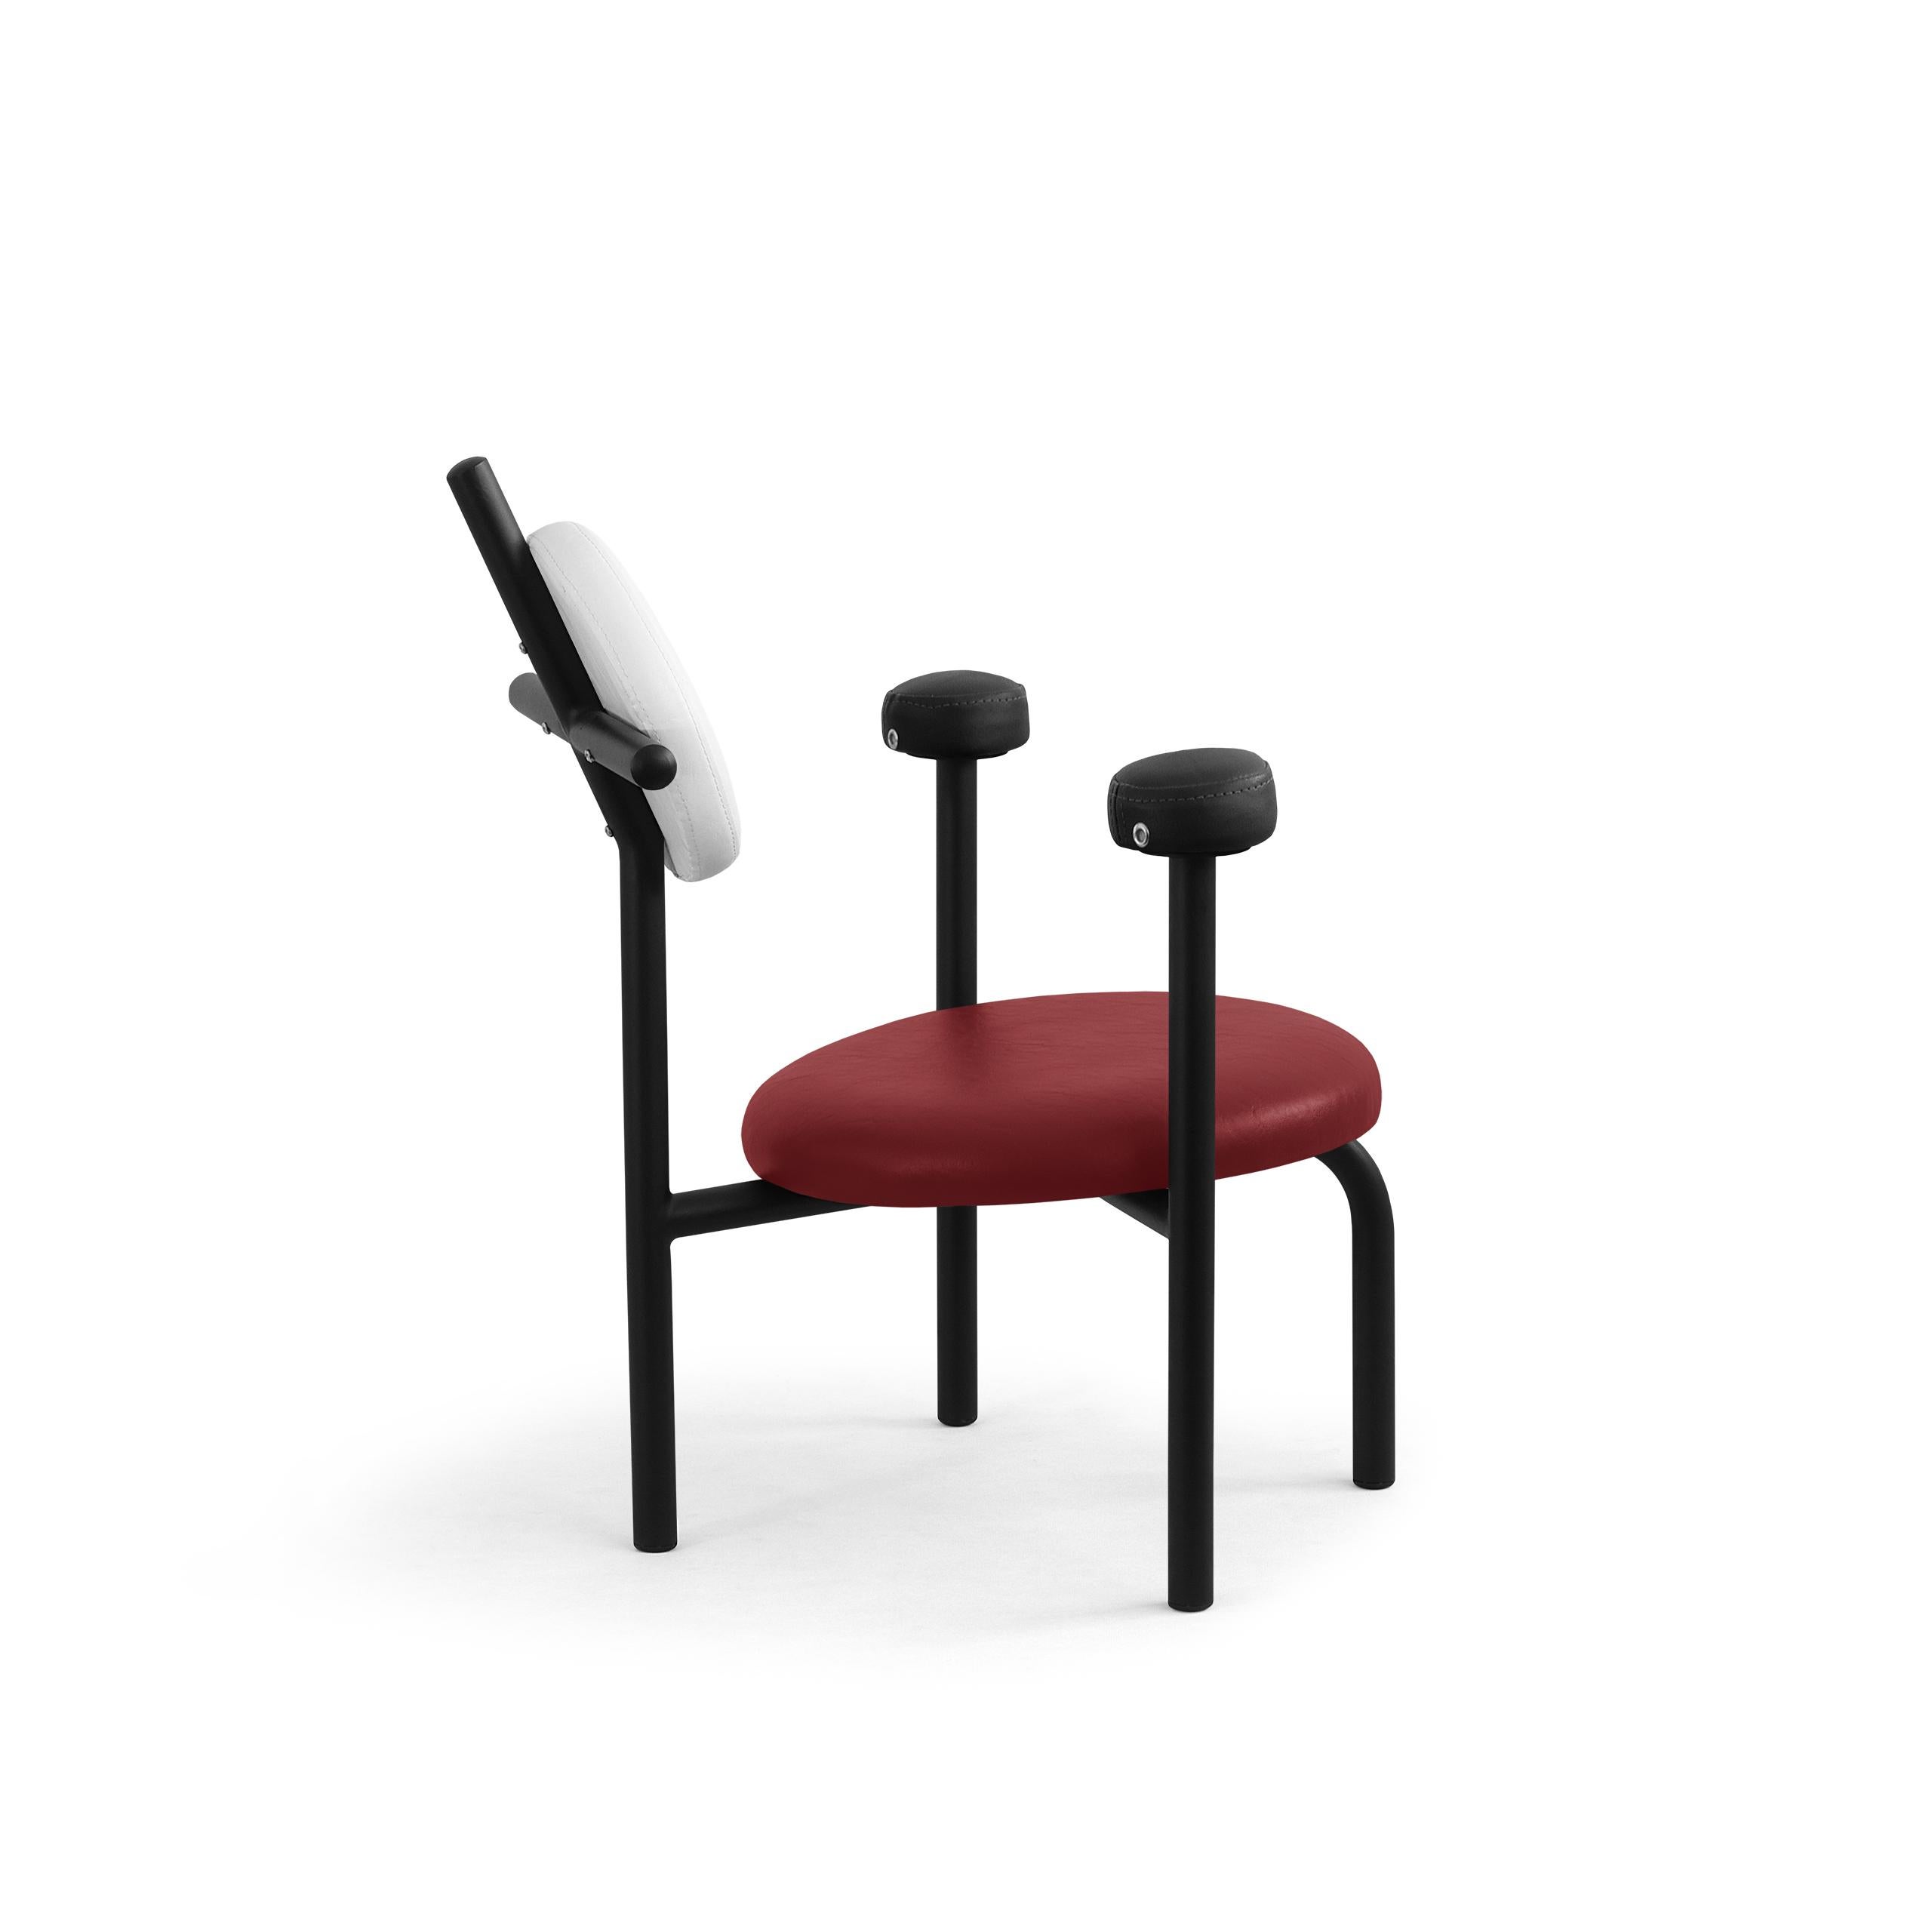 PK18 Impermeable Armchair, Red Seat & Black Metal Structure by Paulo Kobylka In New Condition For Sale In Londrina, Paraná